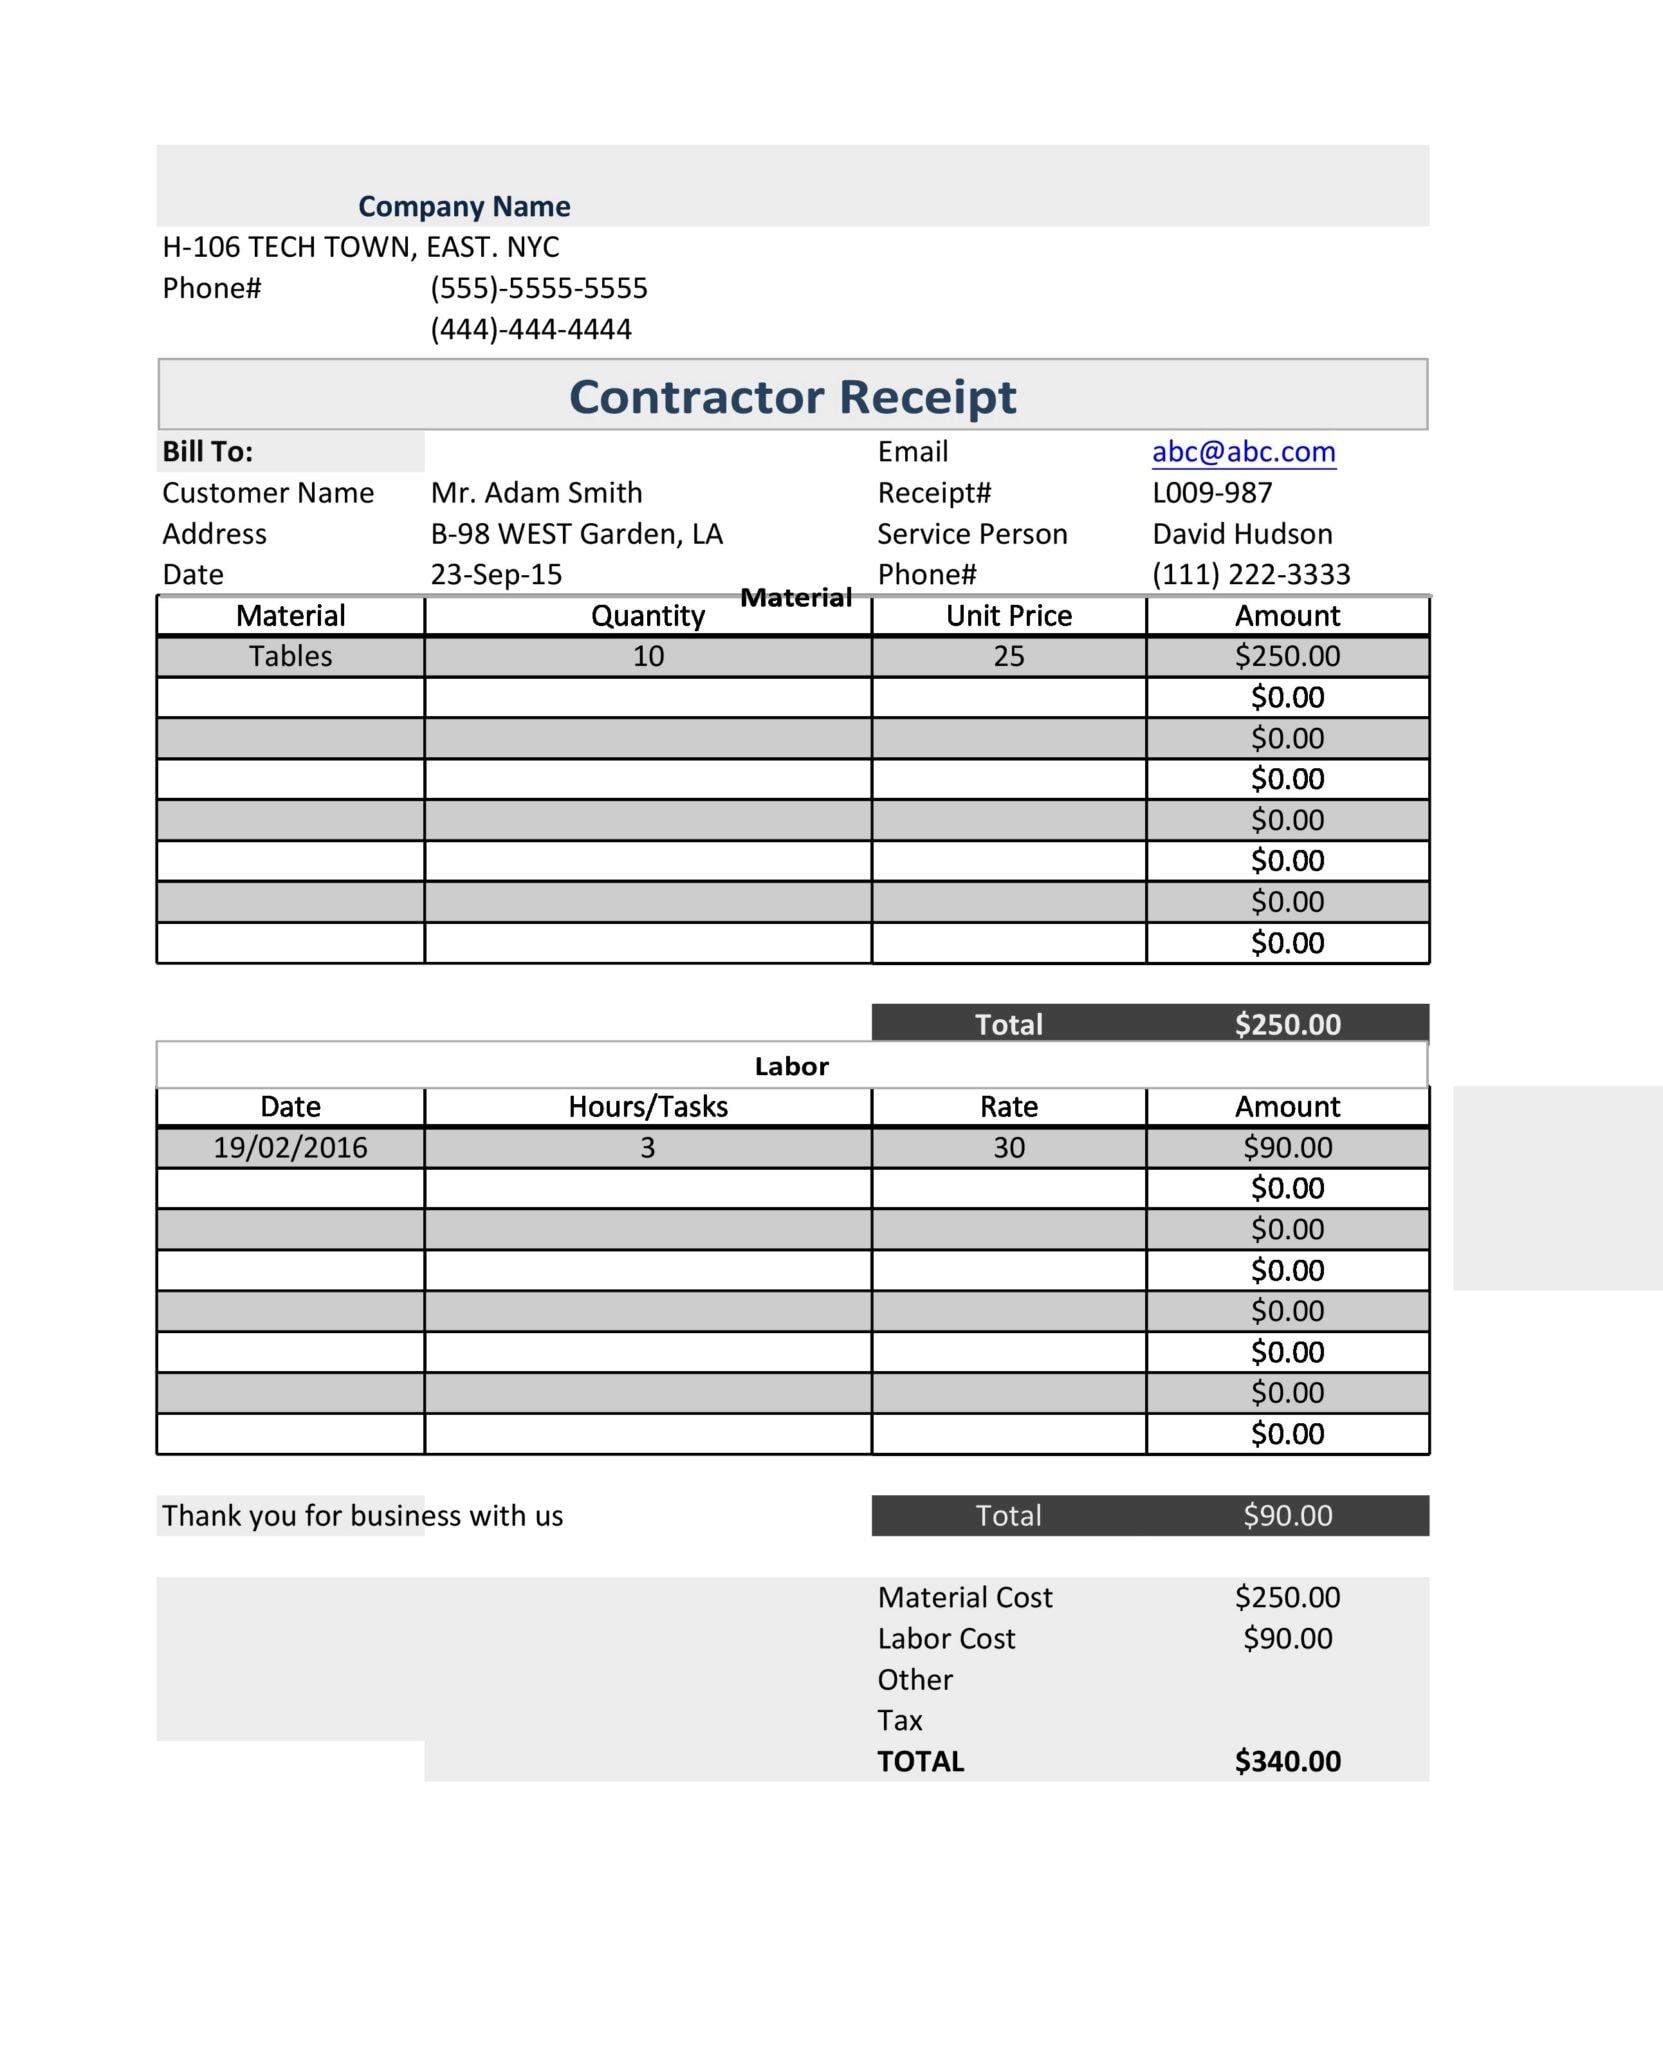 independent contractor invoice sample